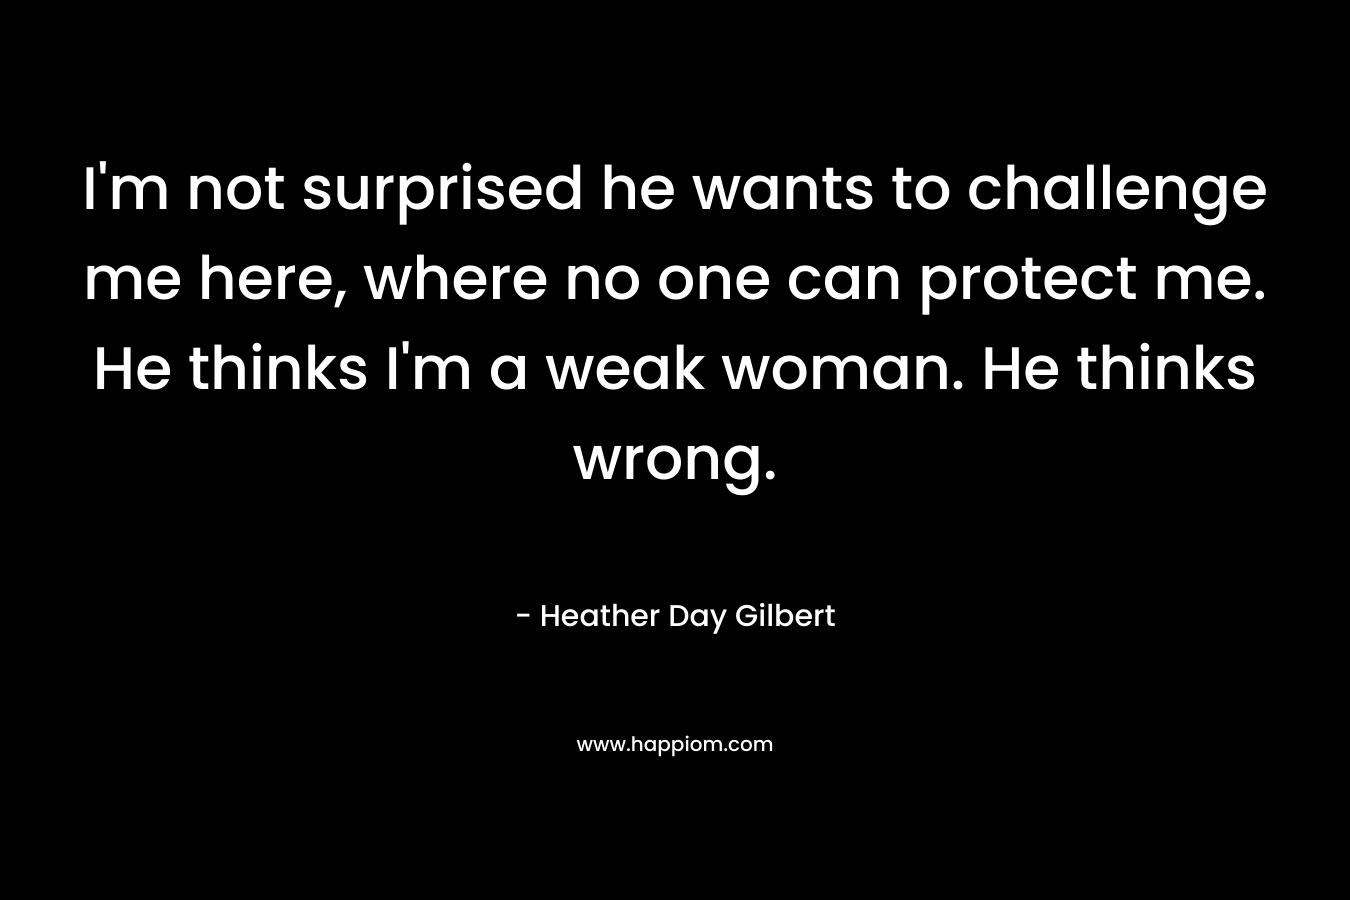 I’m not surprised he wants to challenge me here, where no one can protect me. He thinks I’m a weak woman. He thinks wrong. – Heather Day Gilbert